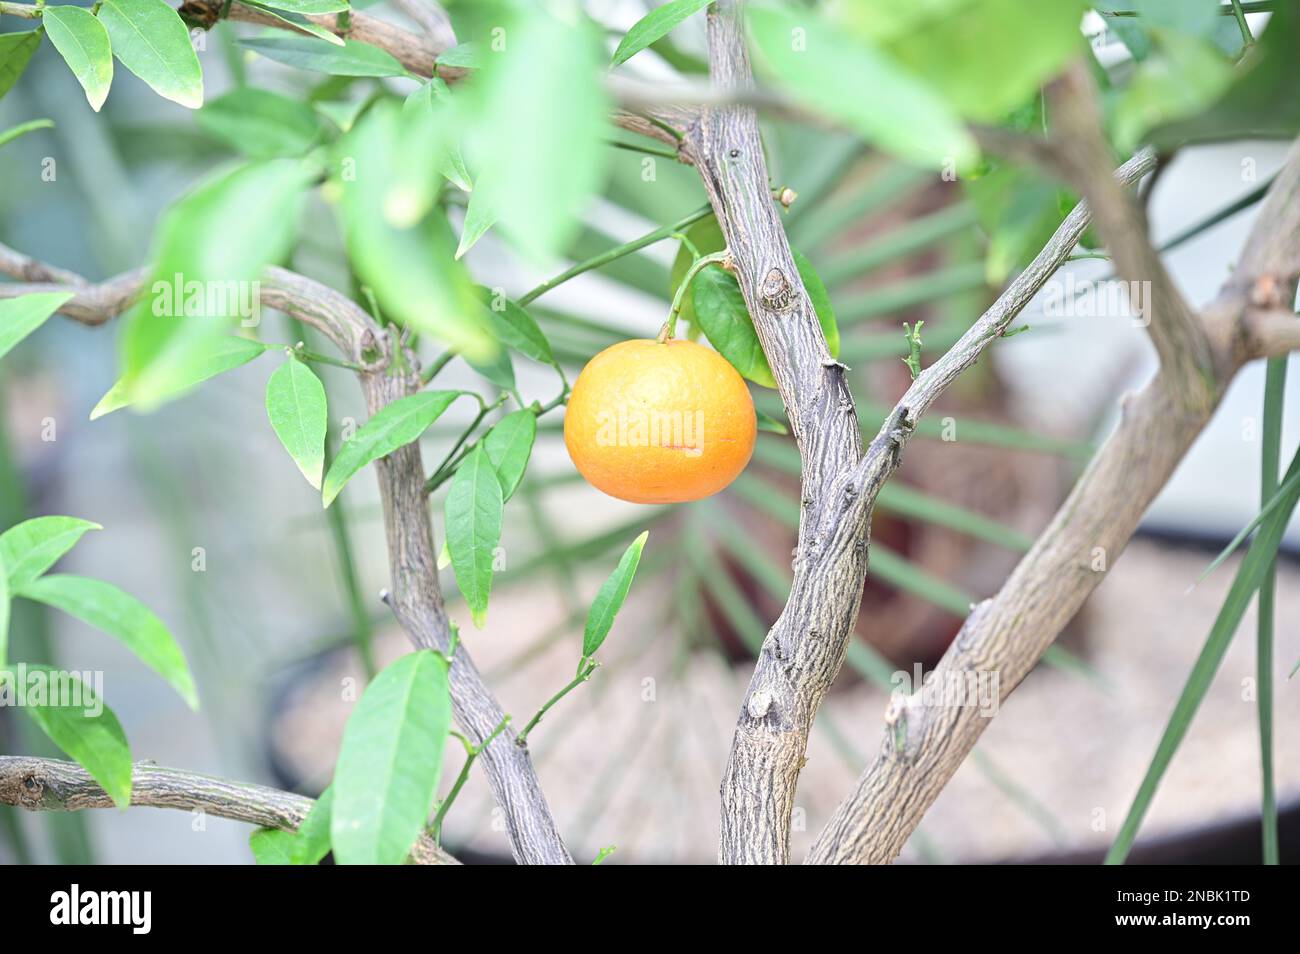 Tangerines that look delicious are growing on the branches Stock Photo